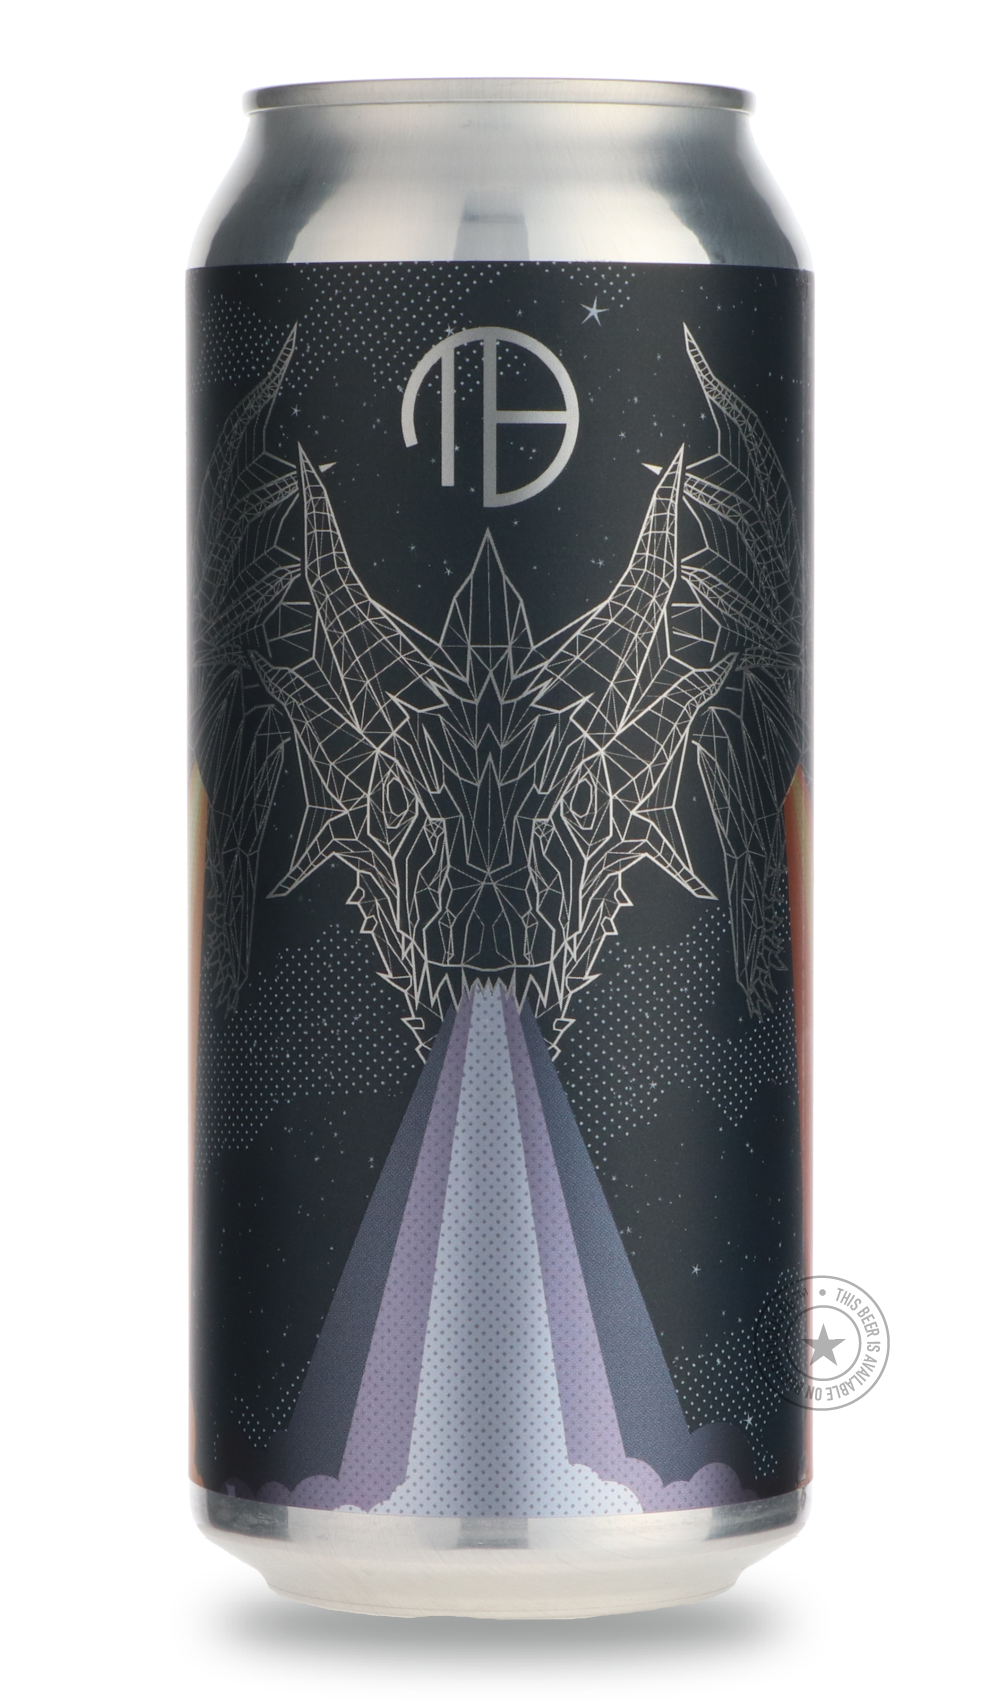 -Mortalis- Hydra | Blueberry + Tangerine + Mango-Sour / Wild & Fruity- Only @ Beer Republic - The best online beer store for American & Canadian craft beer - Buy beer online from the USA and Canada - Bier online kopen - Amerikaans bier kopen - Craft beer store - Craft beer kopen - Amerikanisch bier kaufen - Bier online kaufen - Acheter biere online - IPA - Stout - Porter - New England IPA - Hazy IPA - Imperial Stout - Barrel Aged - Barrel Aged Imperial Stout - Brown - Dark beer - Blond - Blonde - Pilsner - 